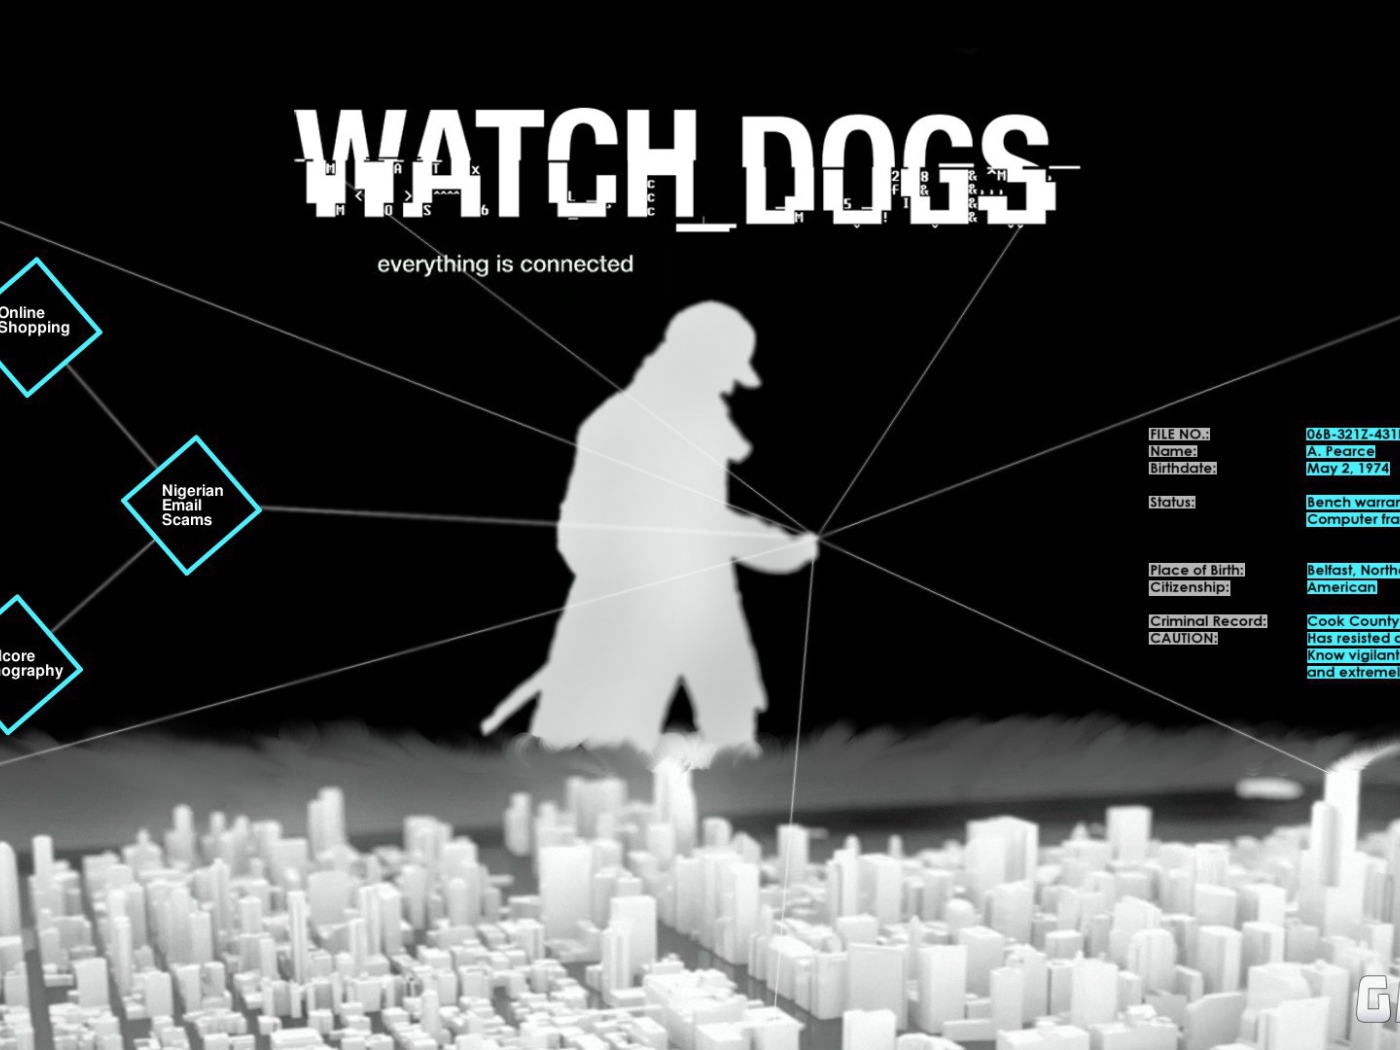 Watch Dogs: the power of connection